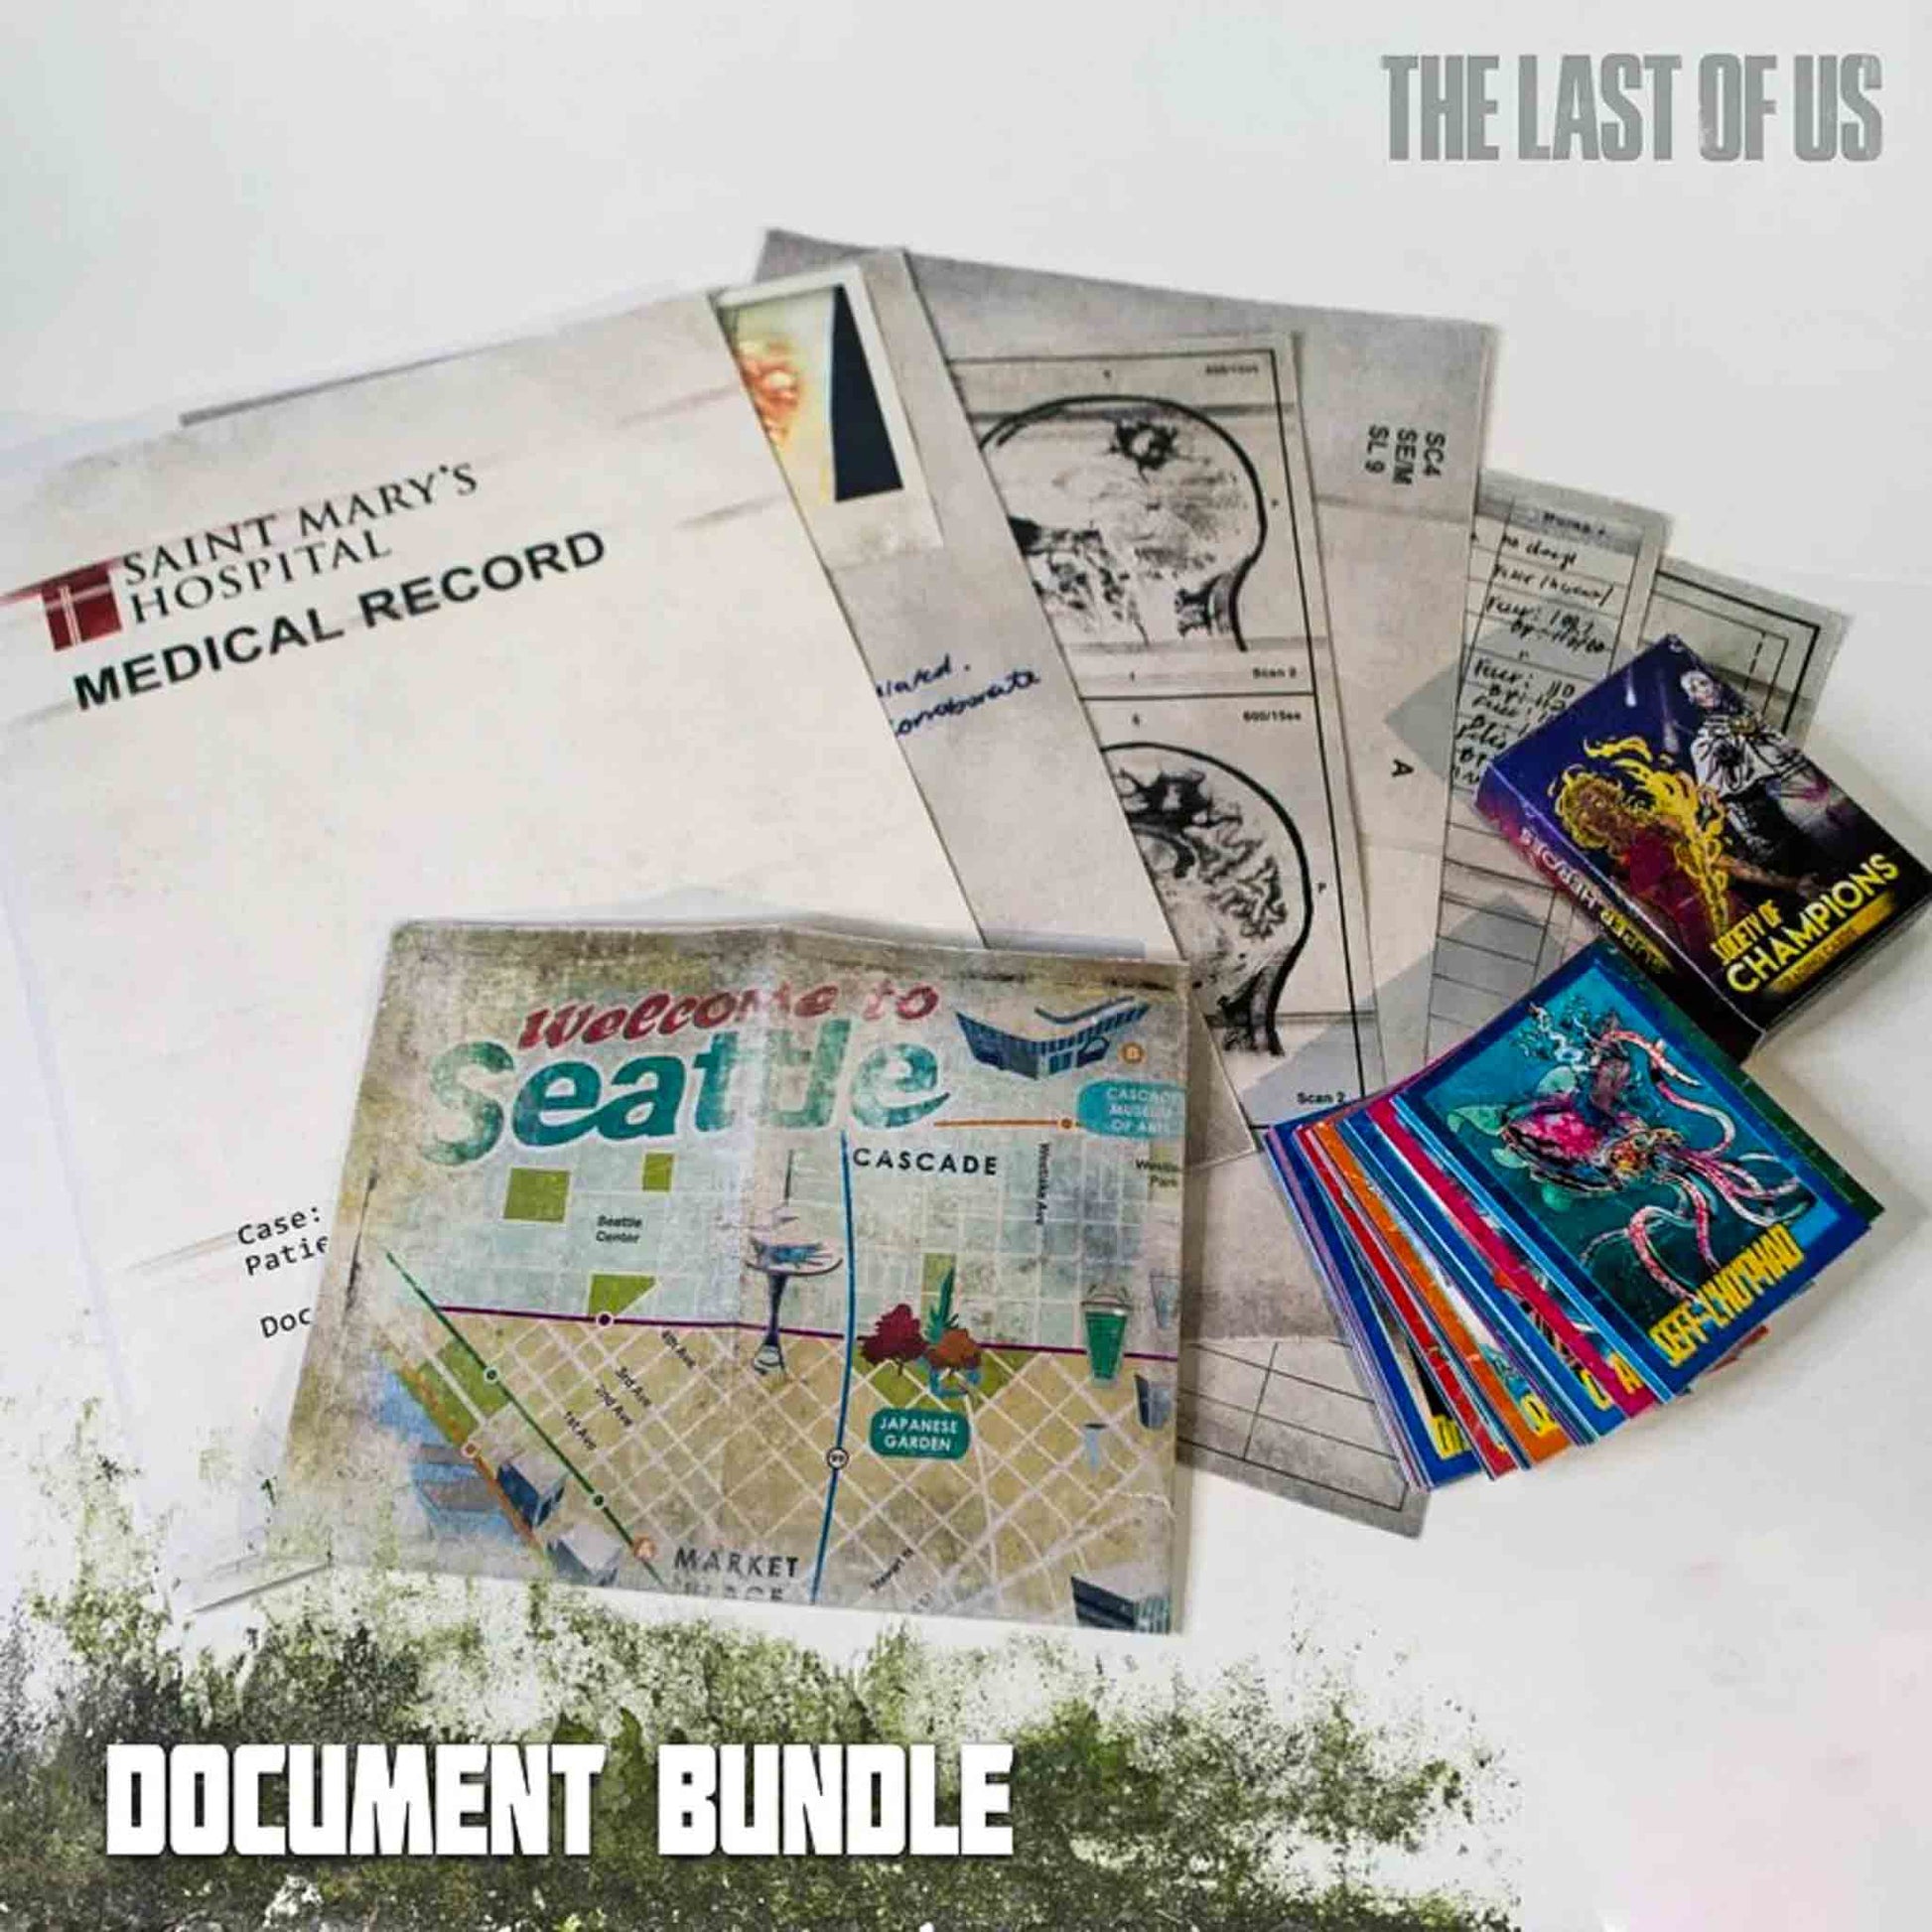 The Last of Us Part II New Fanmade Document Bundle - Cards + Ellie's Map + Medical Available at 2Fast2See.co